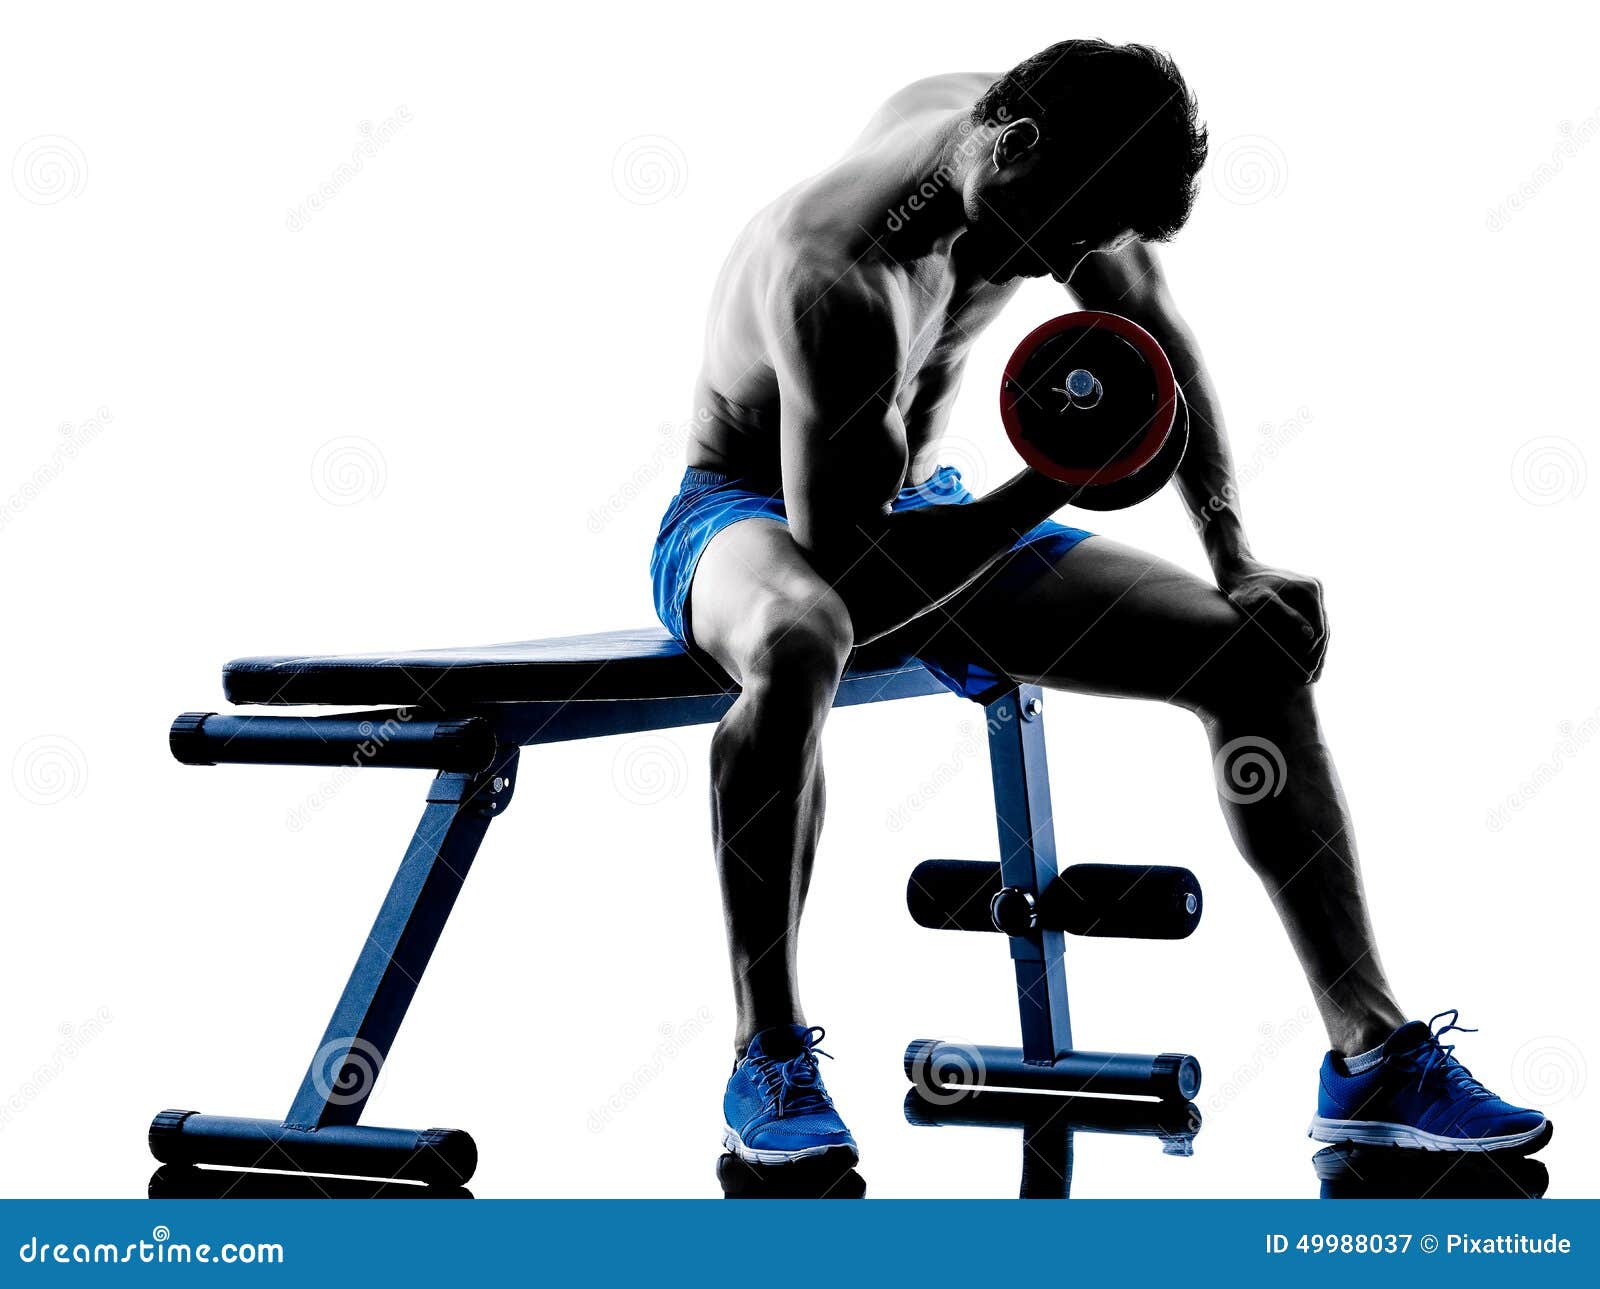 man exercising fitness weights bench press exercises silhouette